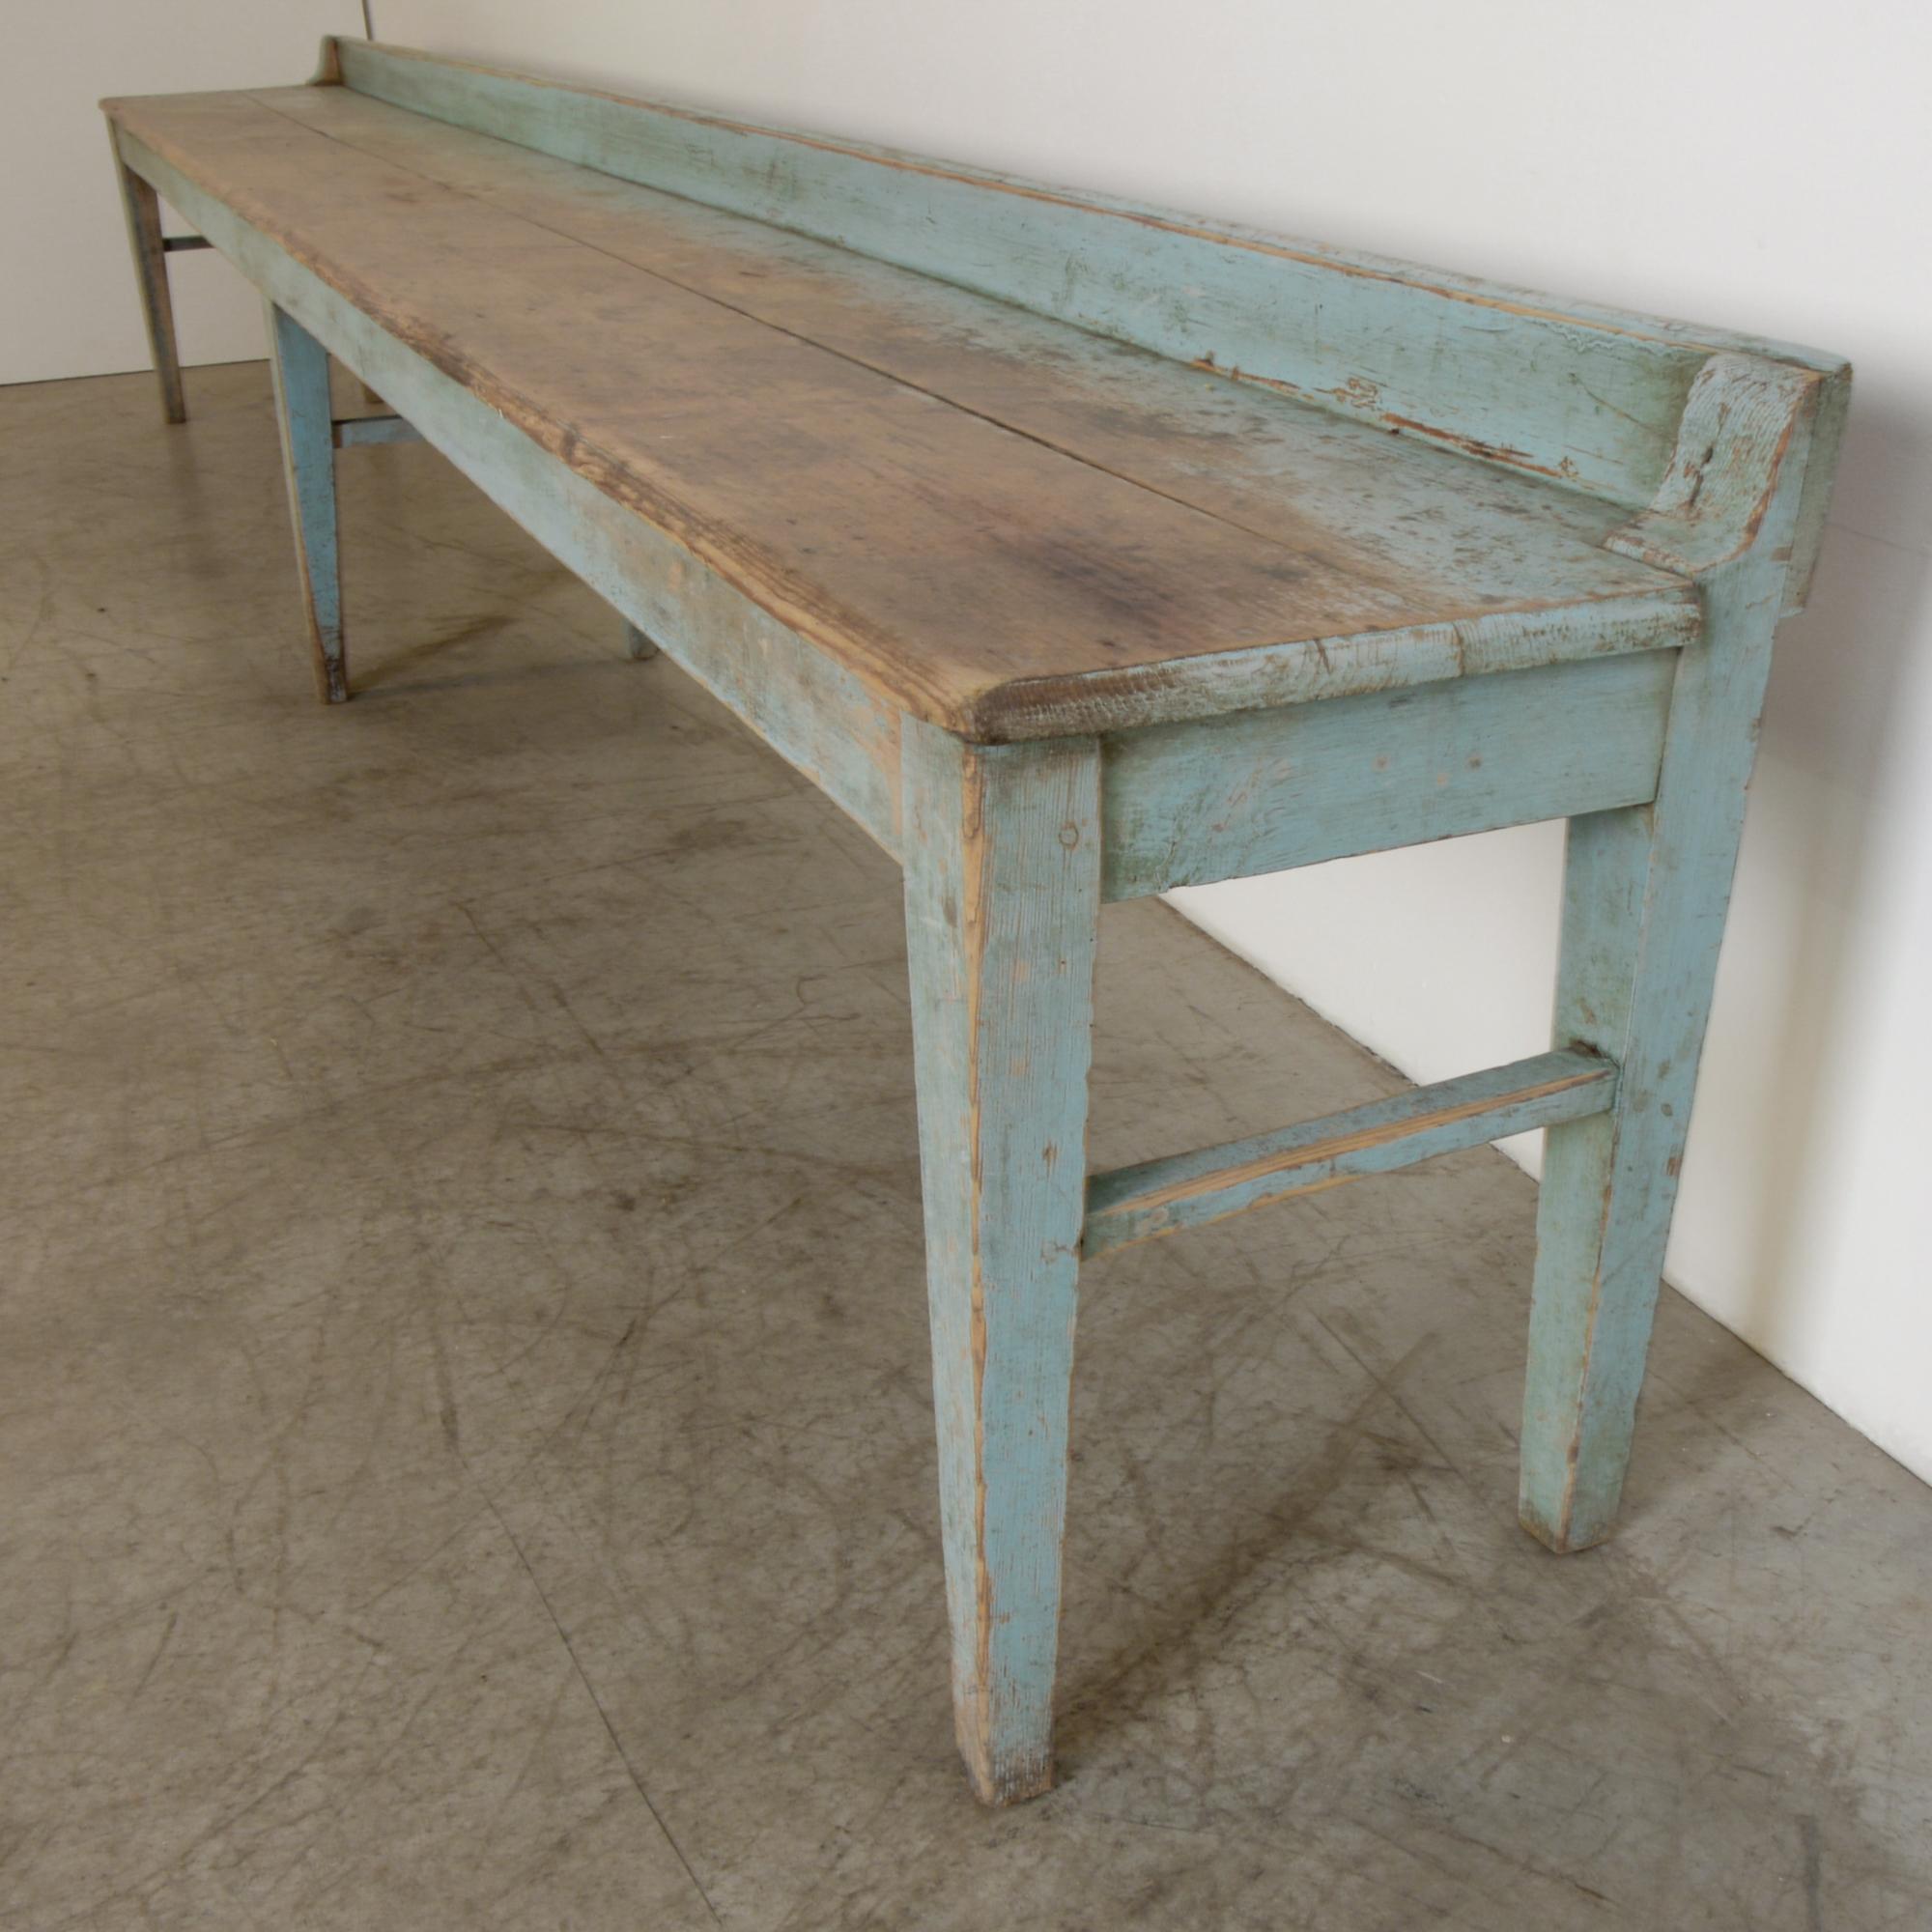 Softwood Antique French Painted Wooden Bench